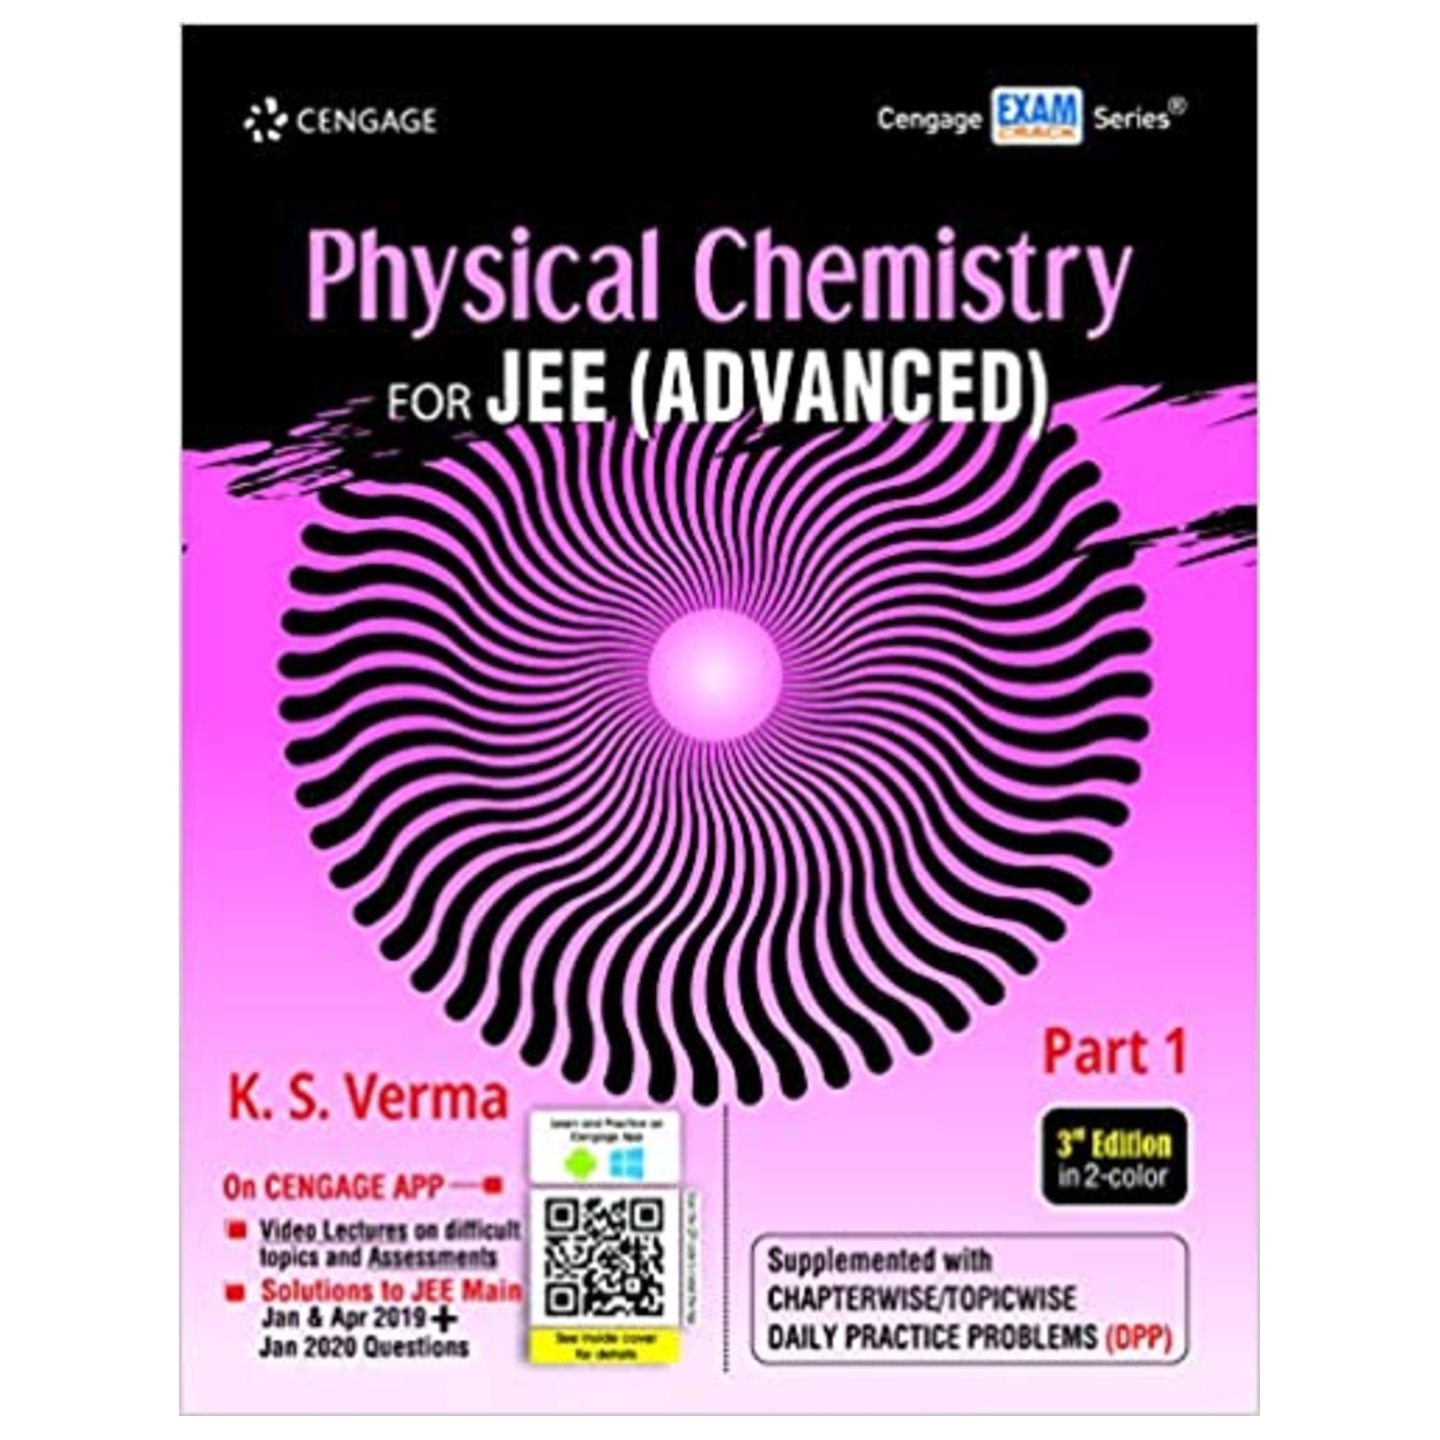 CENGAGE Physical Chemistry for JEE Advanced